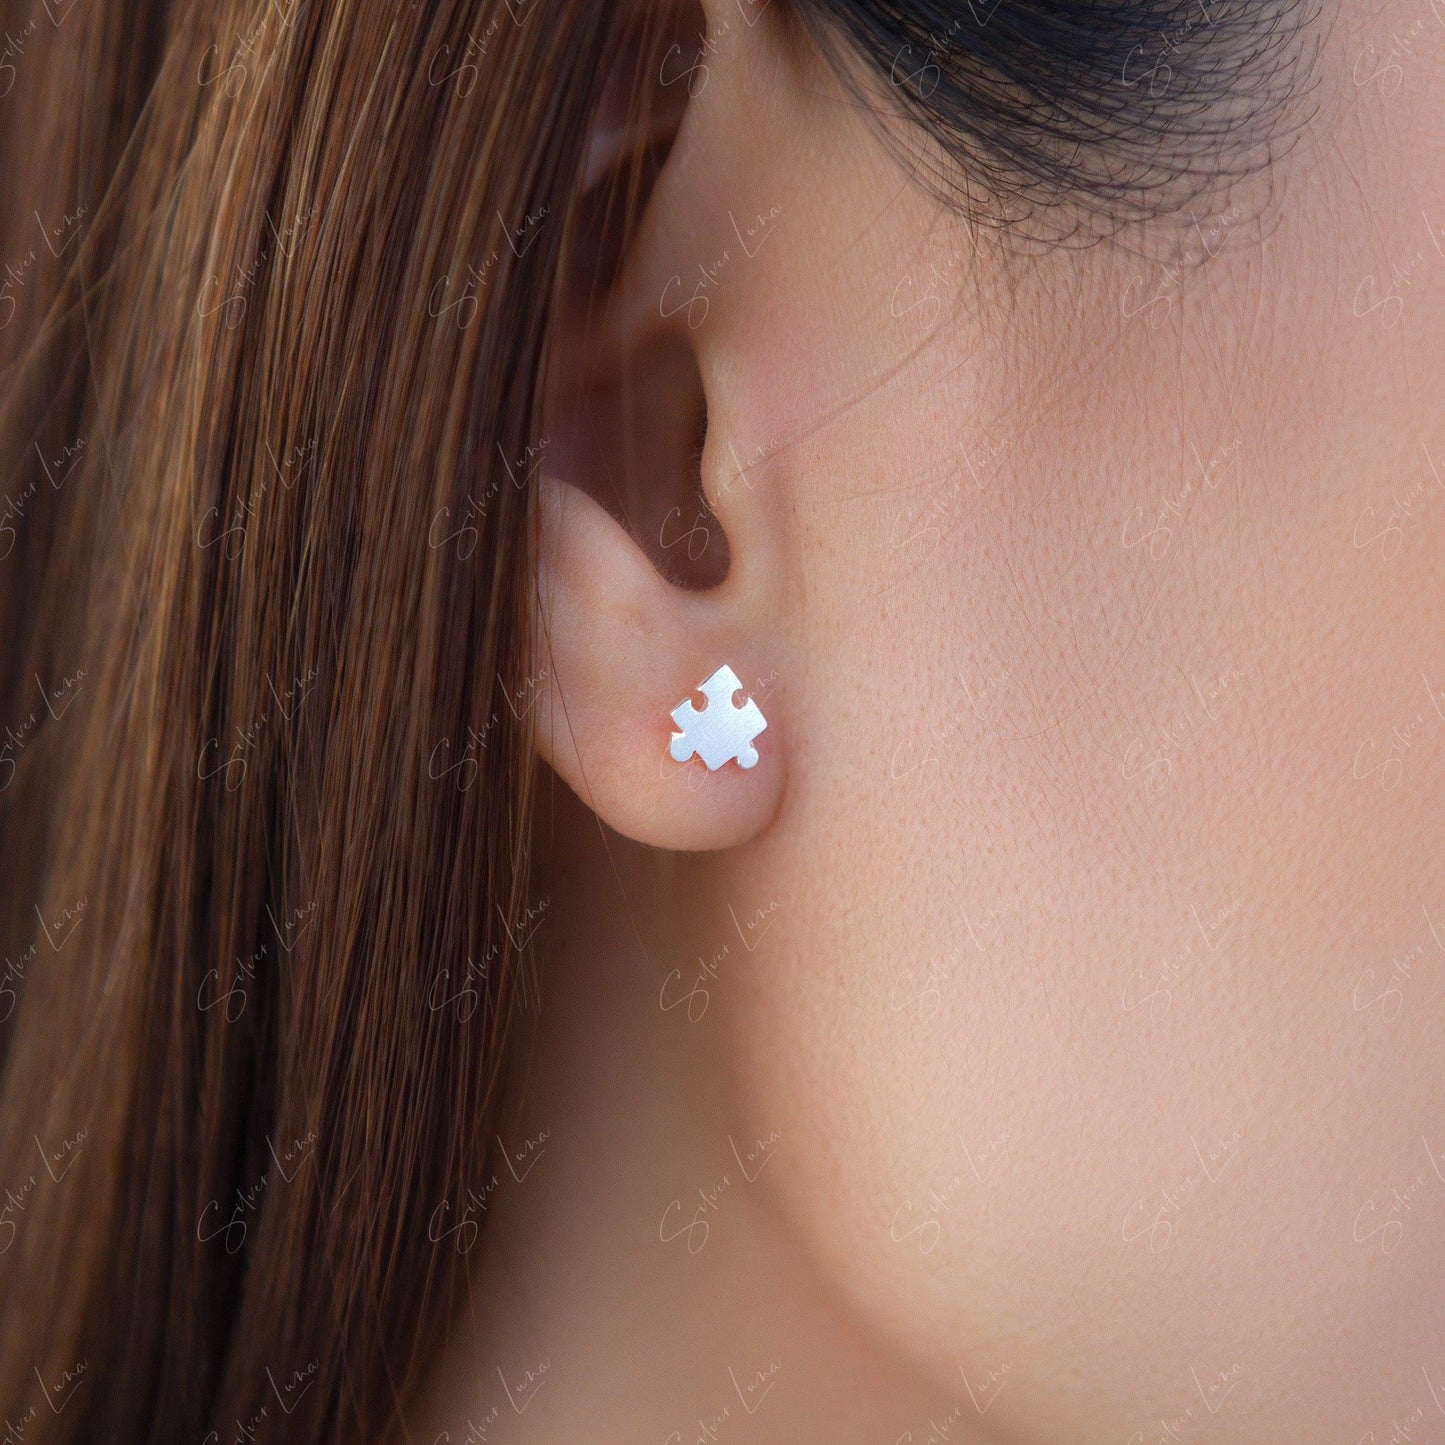 Tiny Puzzle piece Stud Earrings